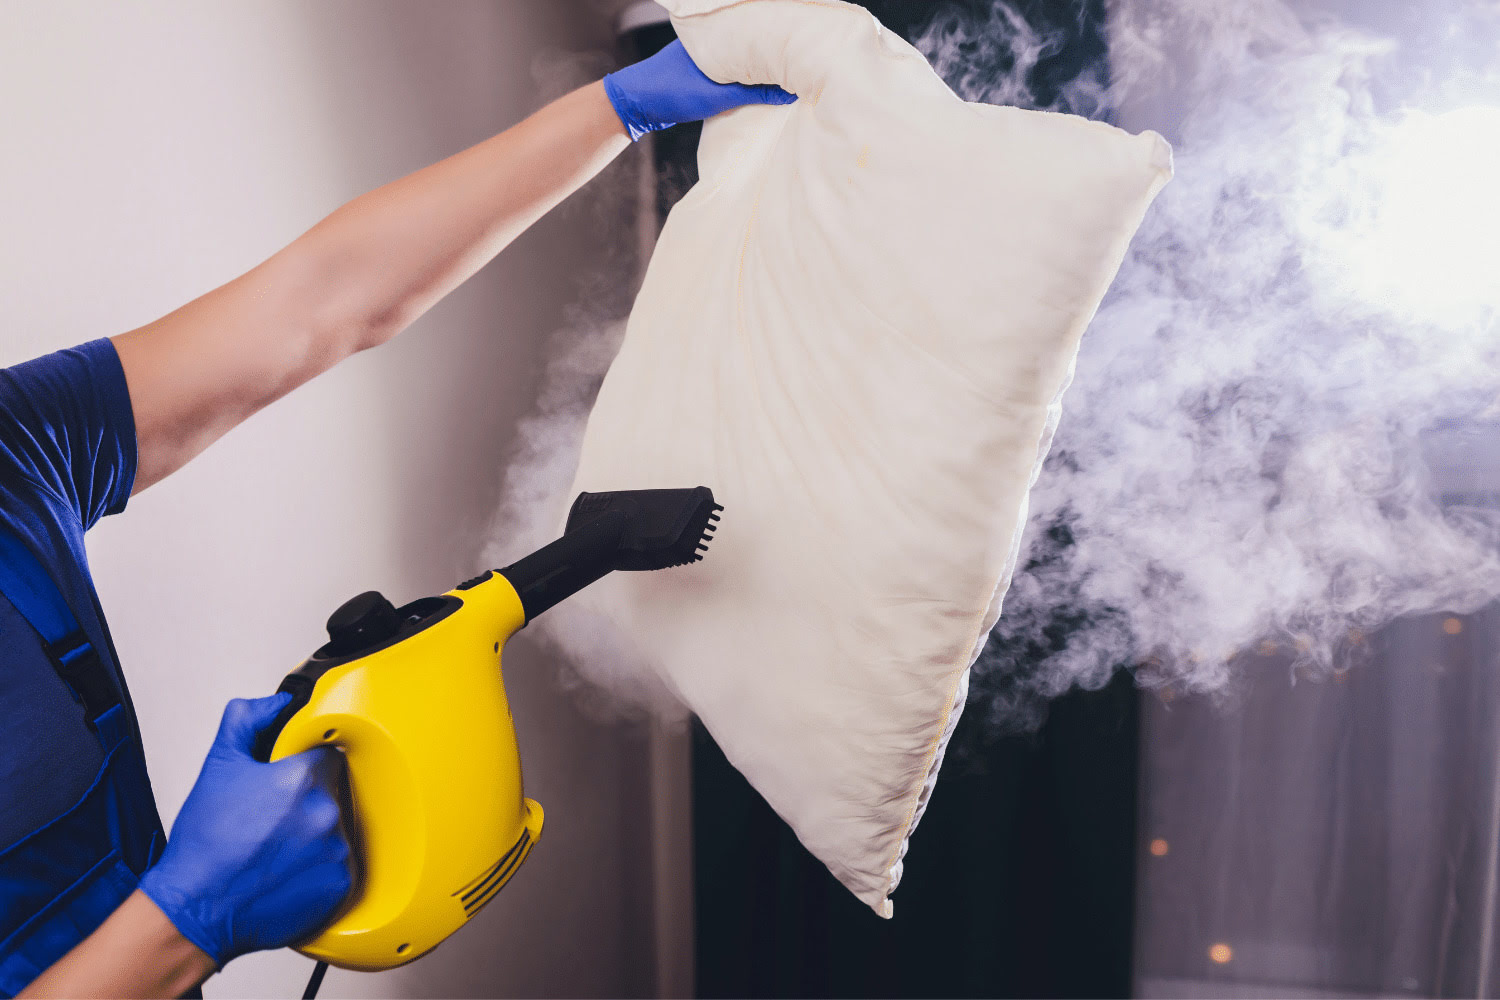 Where To Buy A Steamer To Kill Bed Bugs